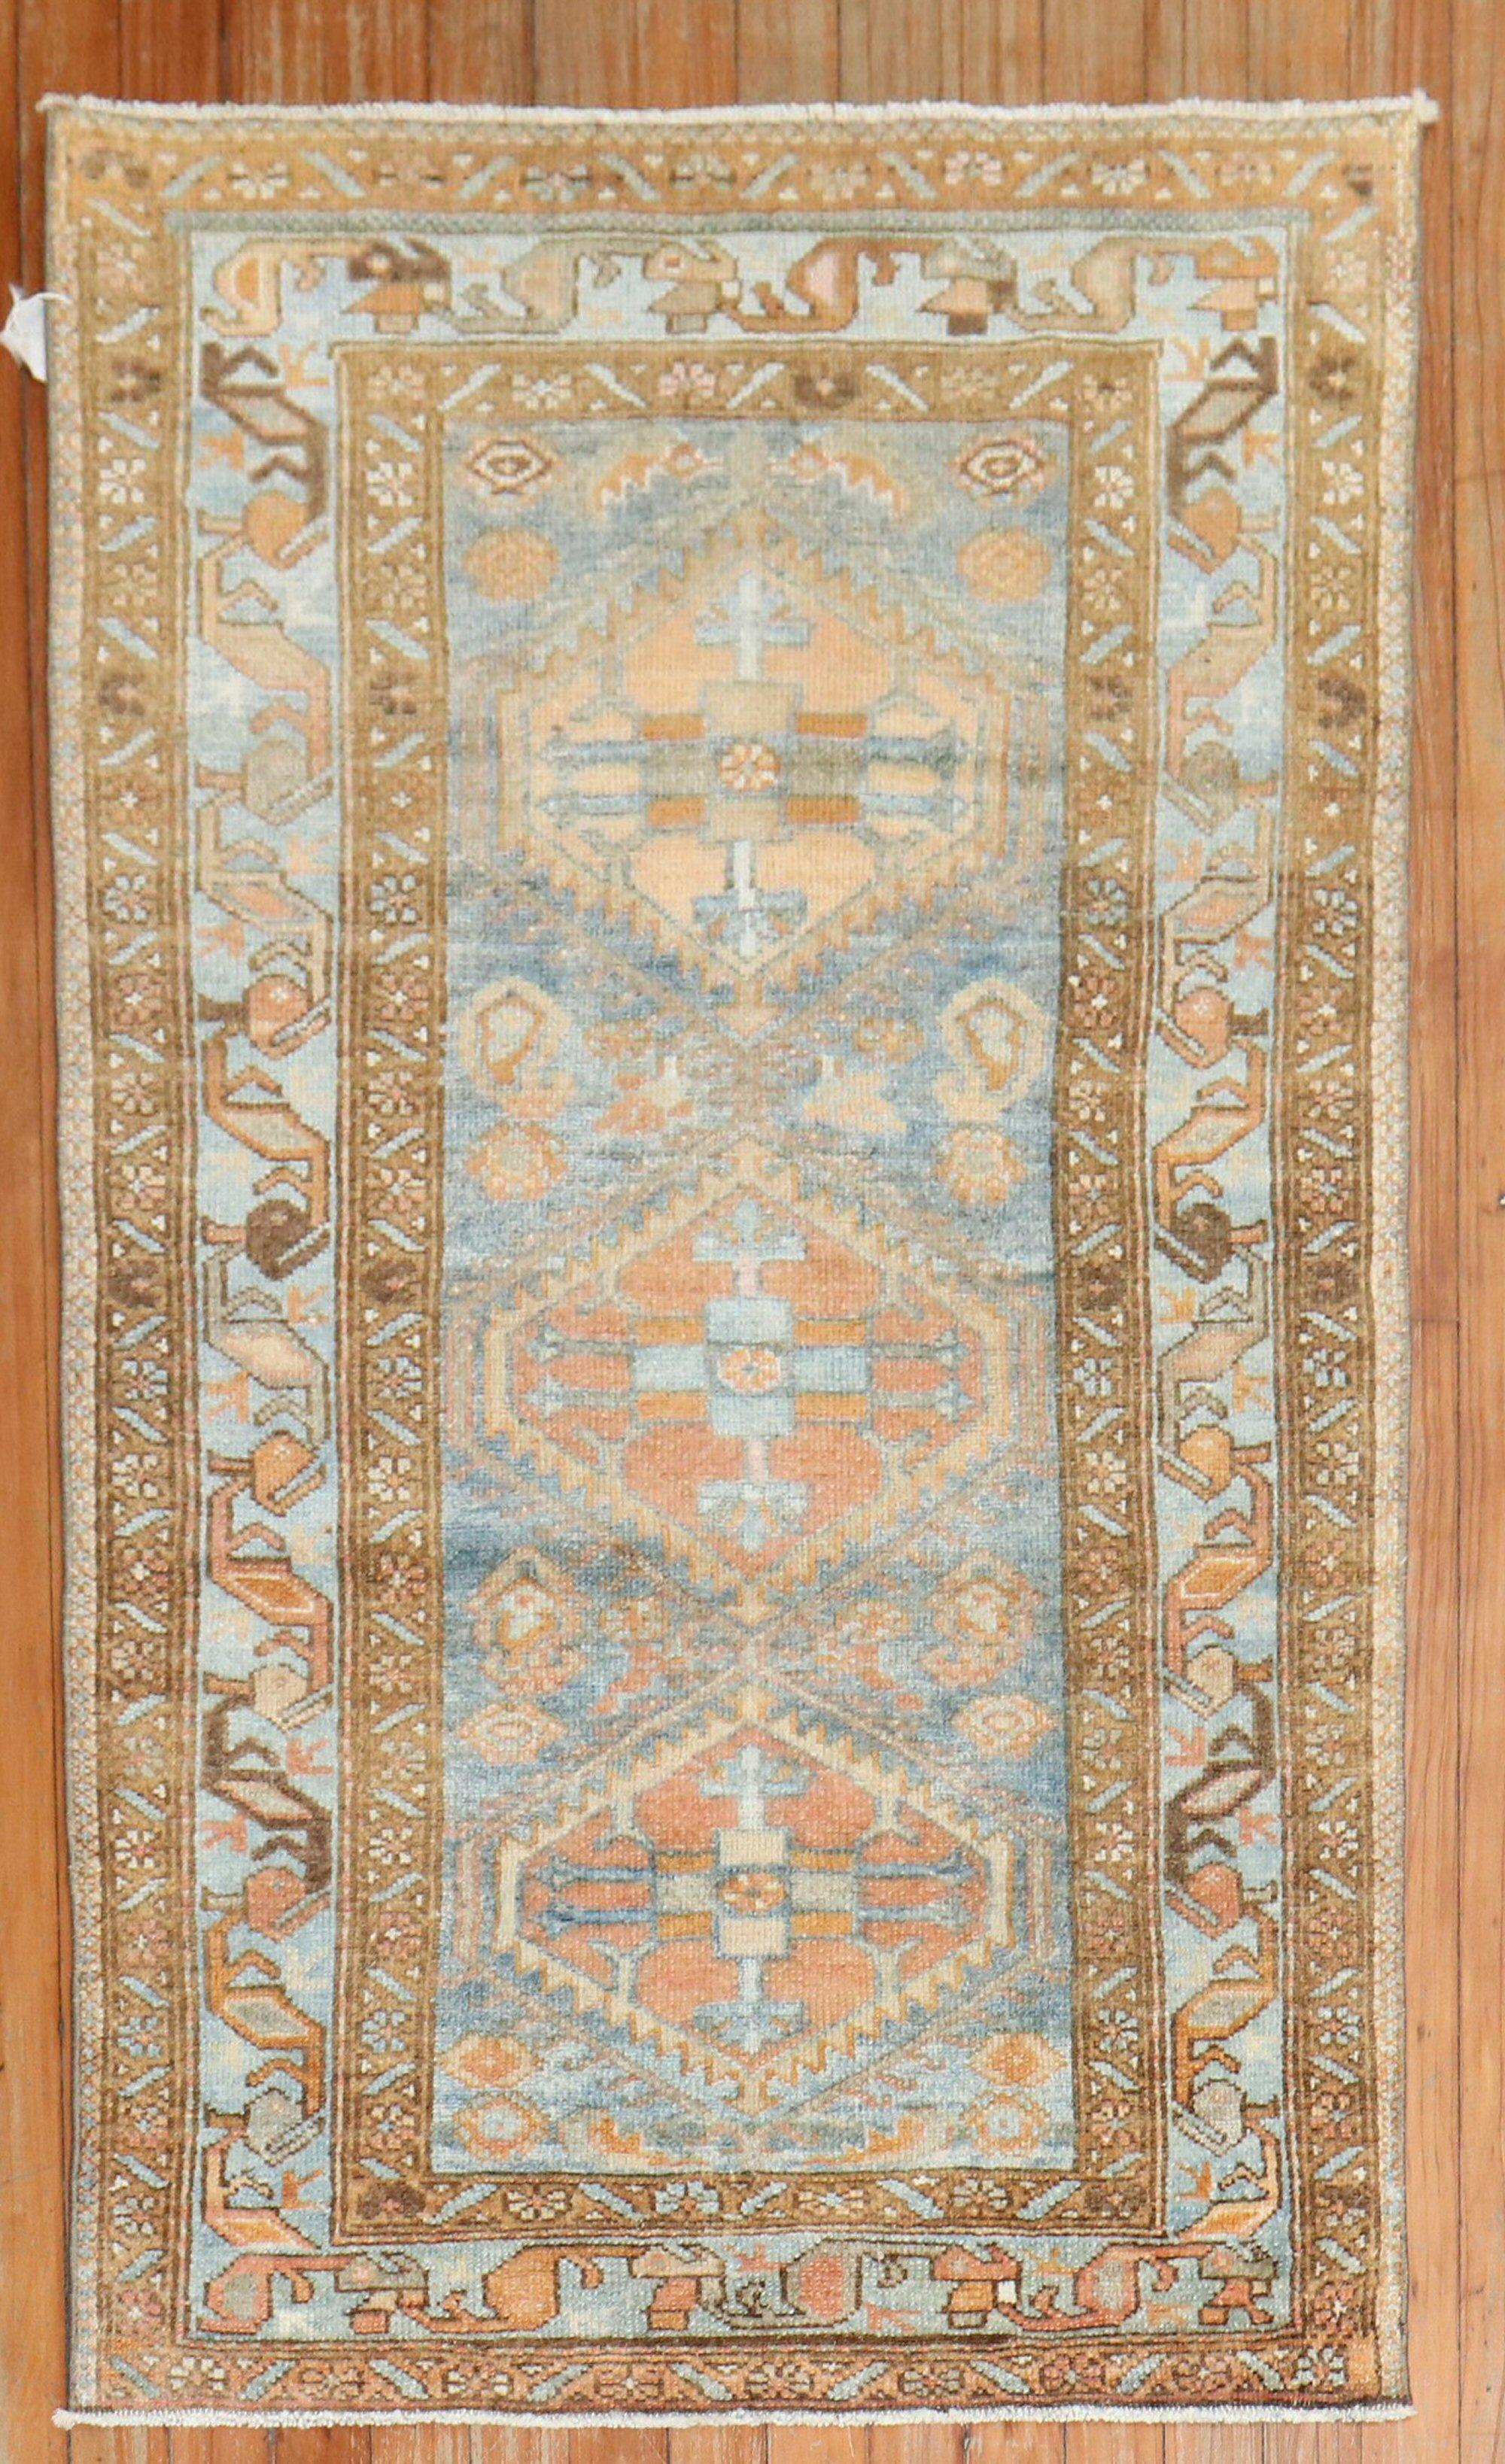 A small size early 20th century Persian Malayer rug in blue and orange

Measures: 2'7